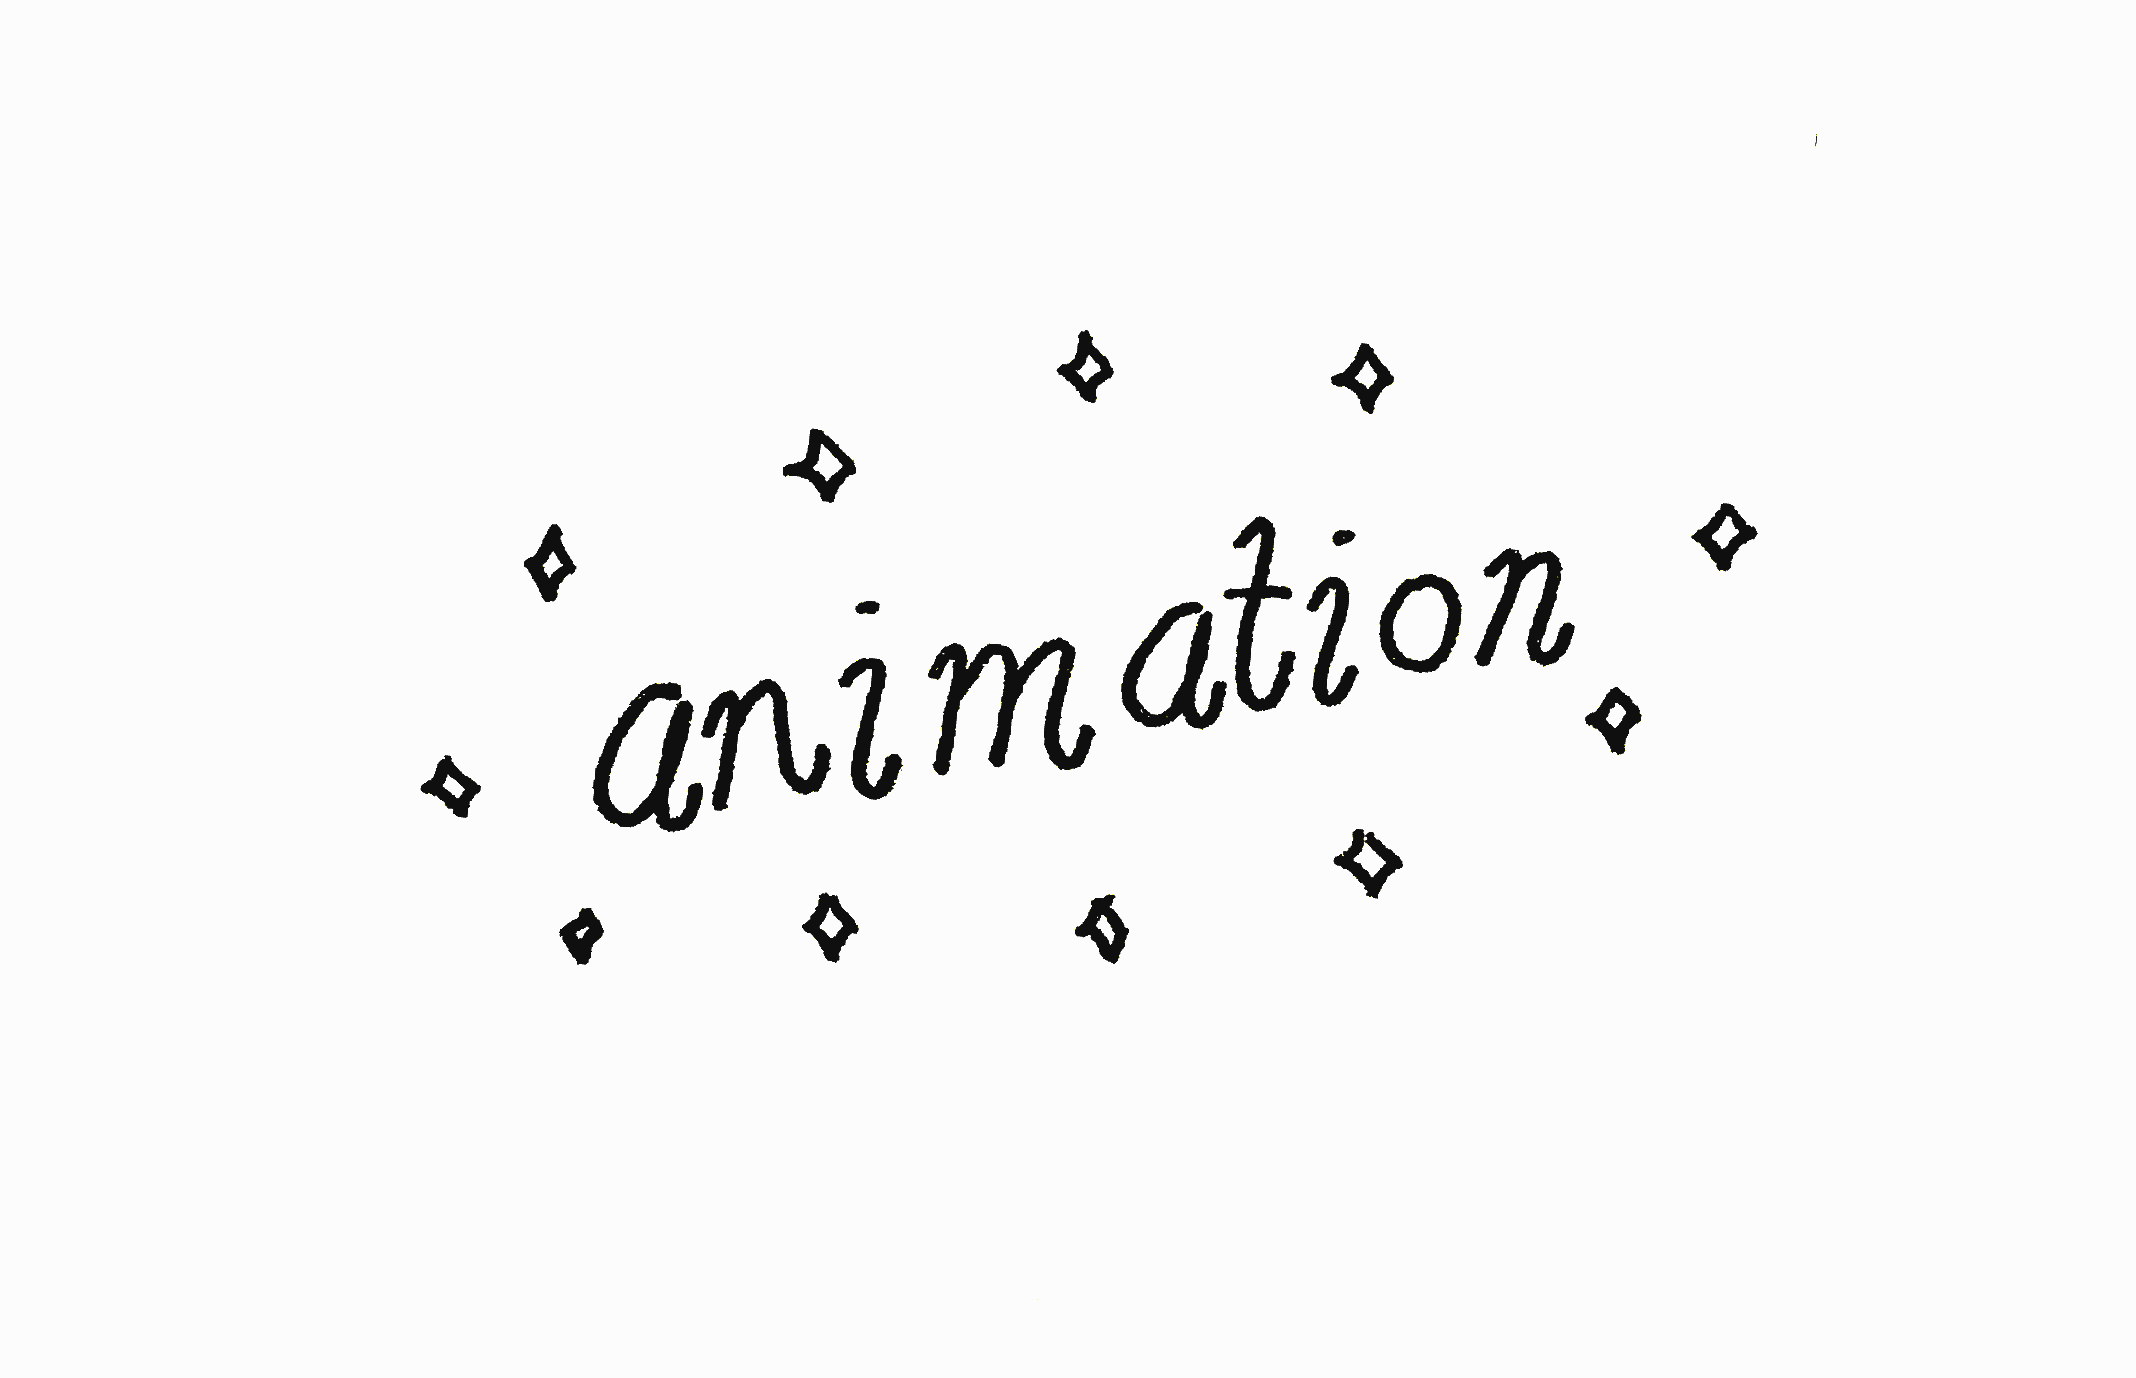 The word 'Animation' surrounded by animated sparkles.